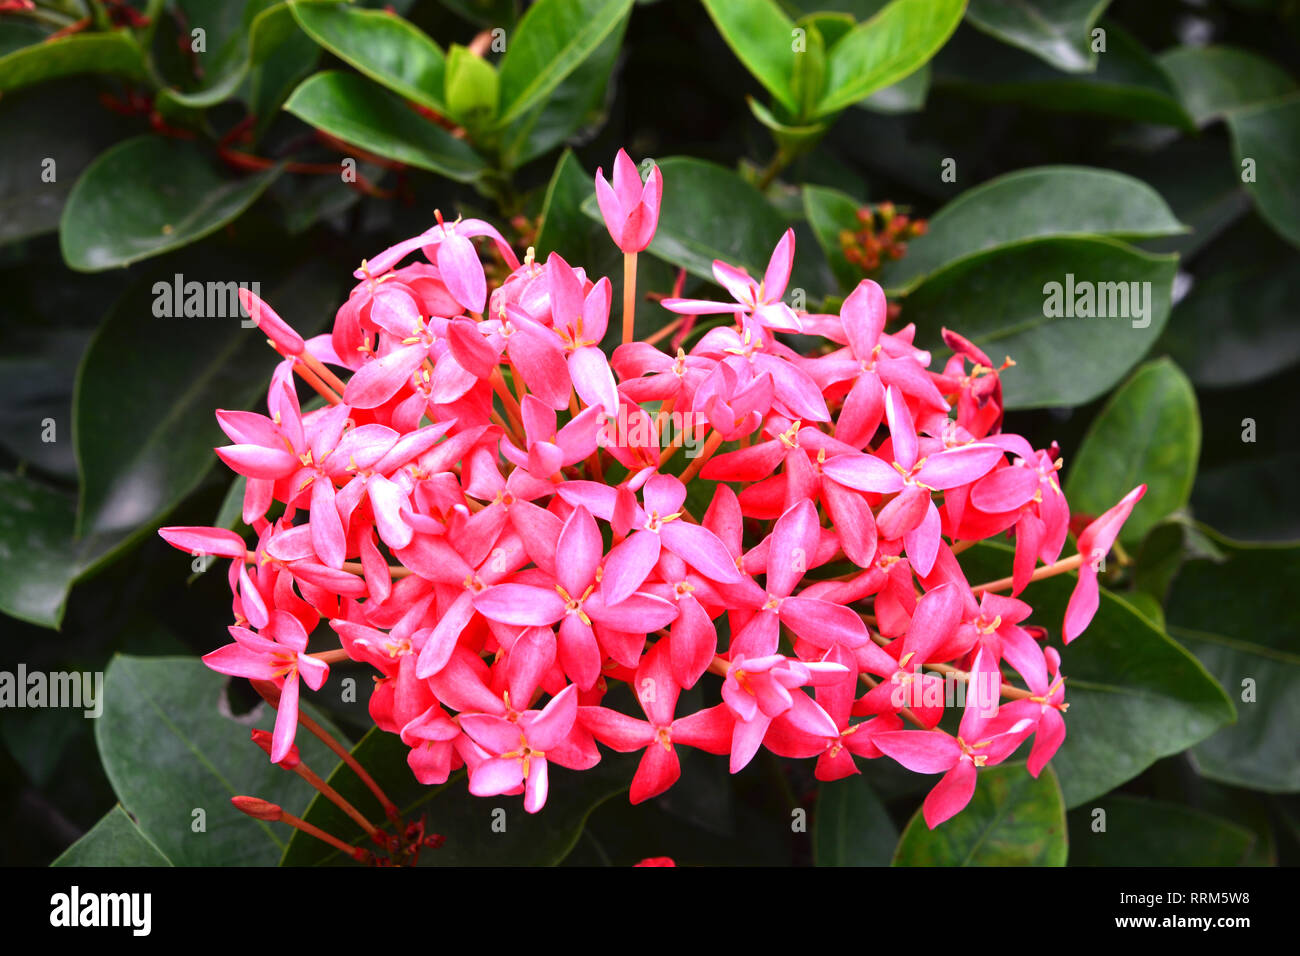 Ixora is a genus of flowering plants in the Rubiaceae family. It is the only genus in the tribe Ixoreae. It consists of tropical evergreen trees and s Stock Photo